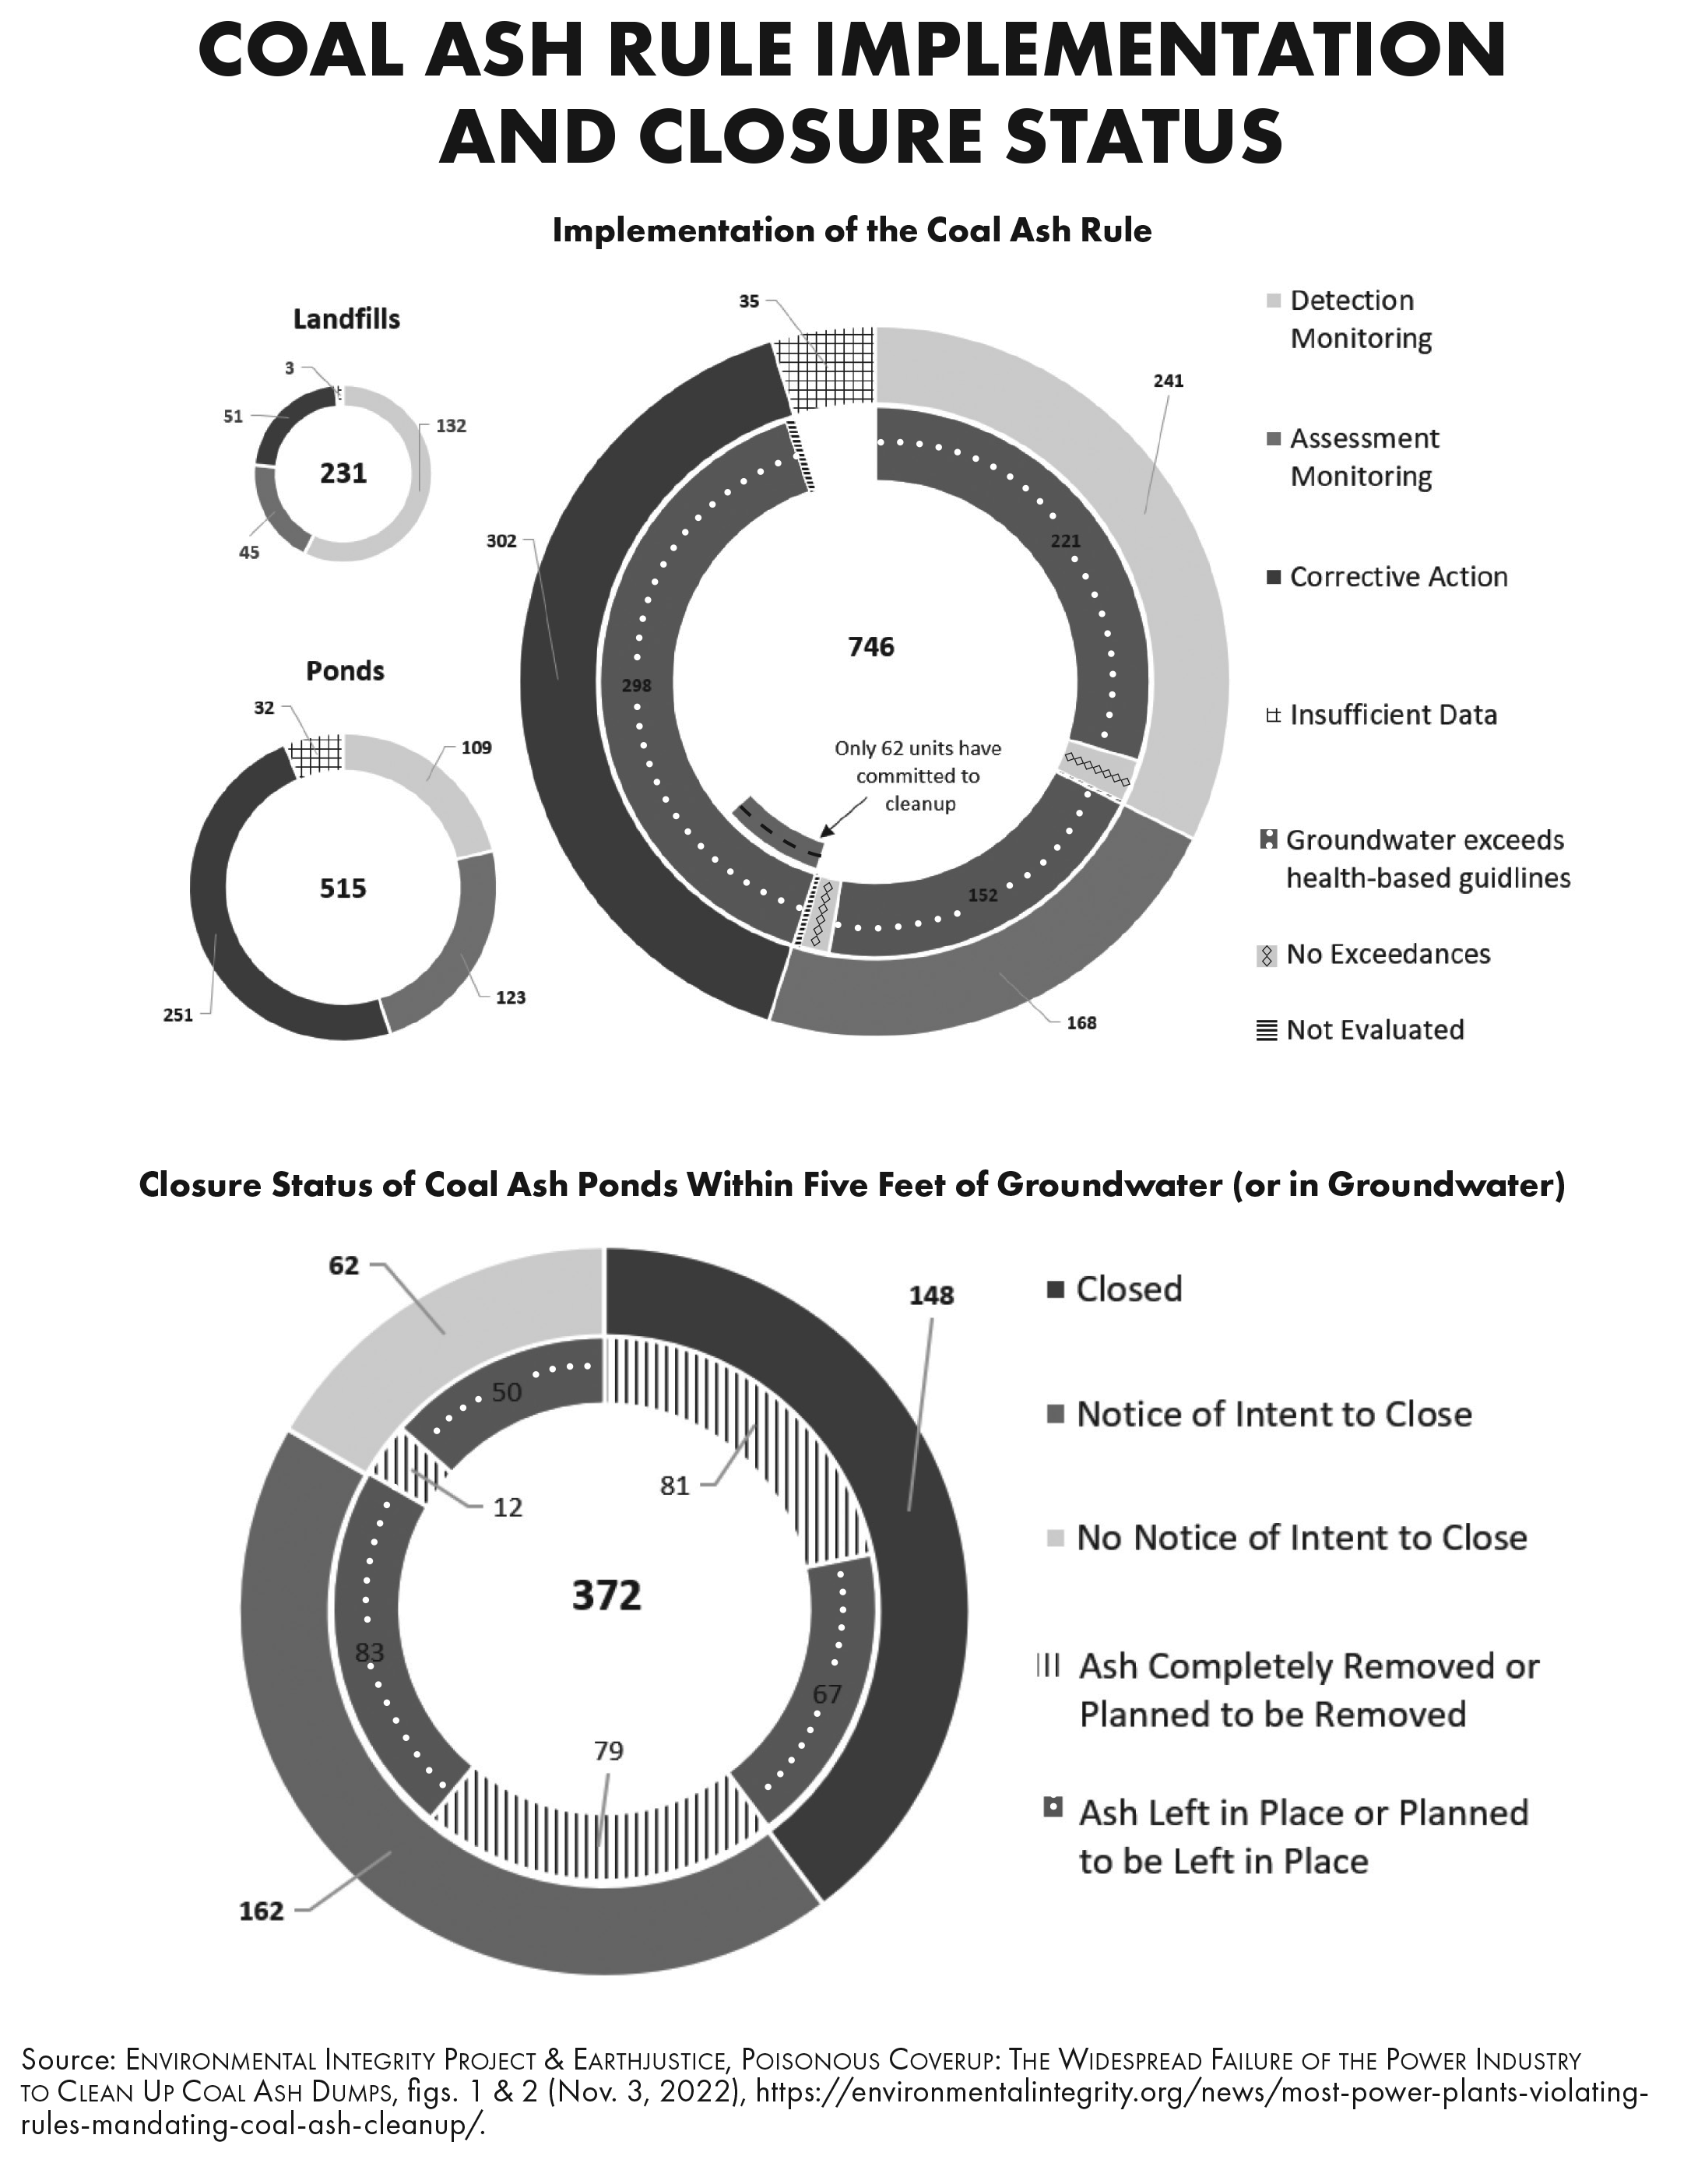 Two pie charts depicting Coal Ash Rule Implementation and Closure Status